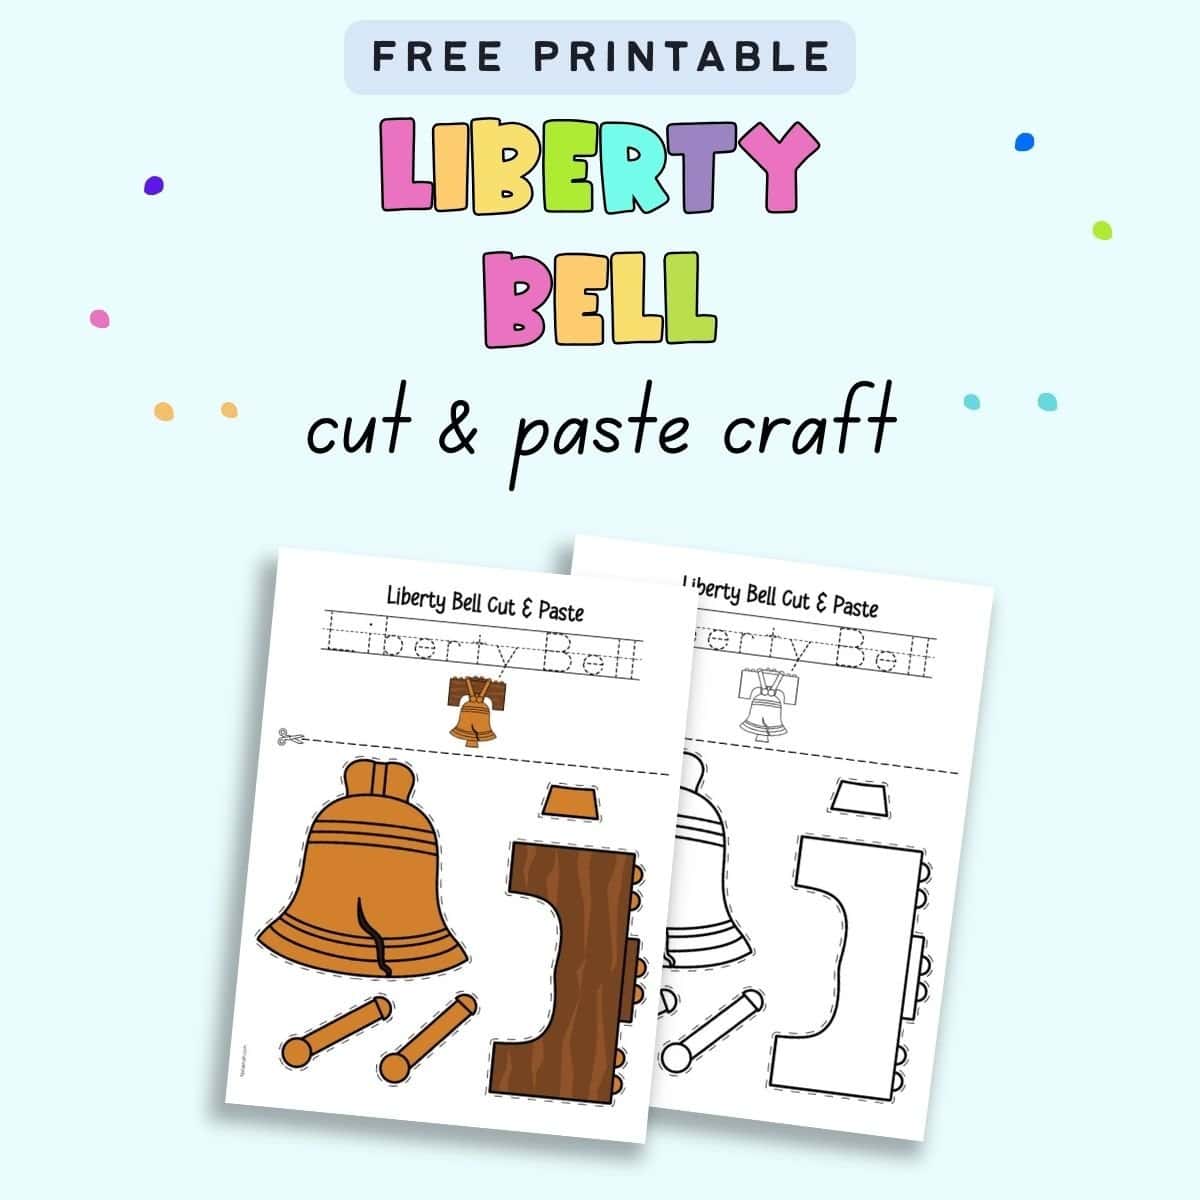 Text "free printable Liberty Bell cut and paste craft" with a preview of two pages of cut and paste craft. One is color and the other black and white.